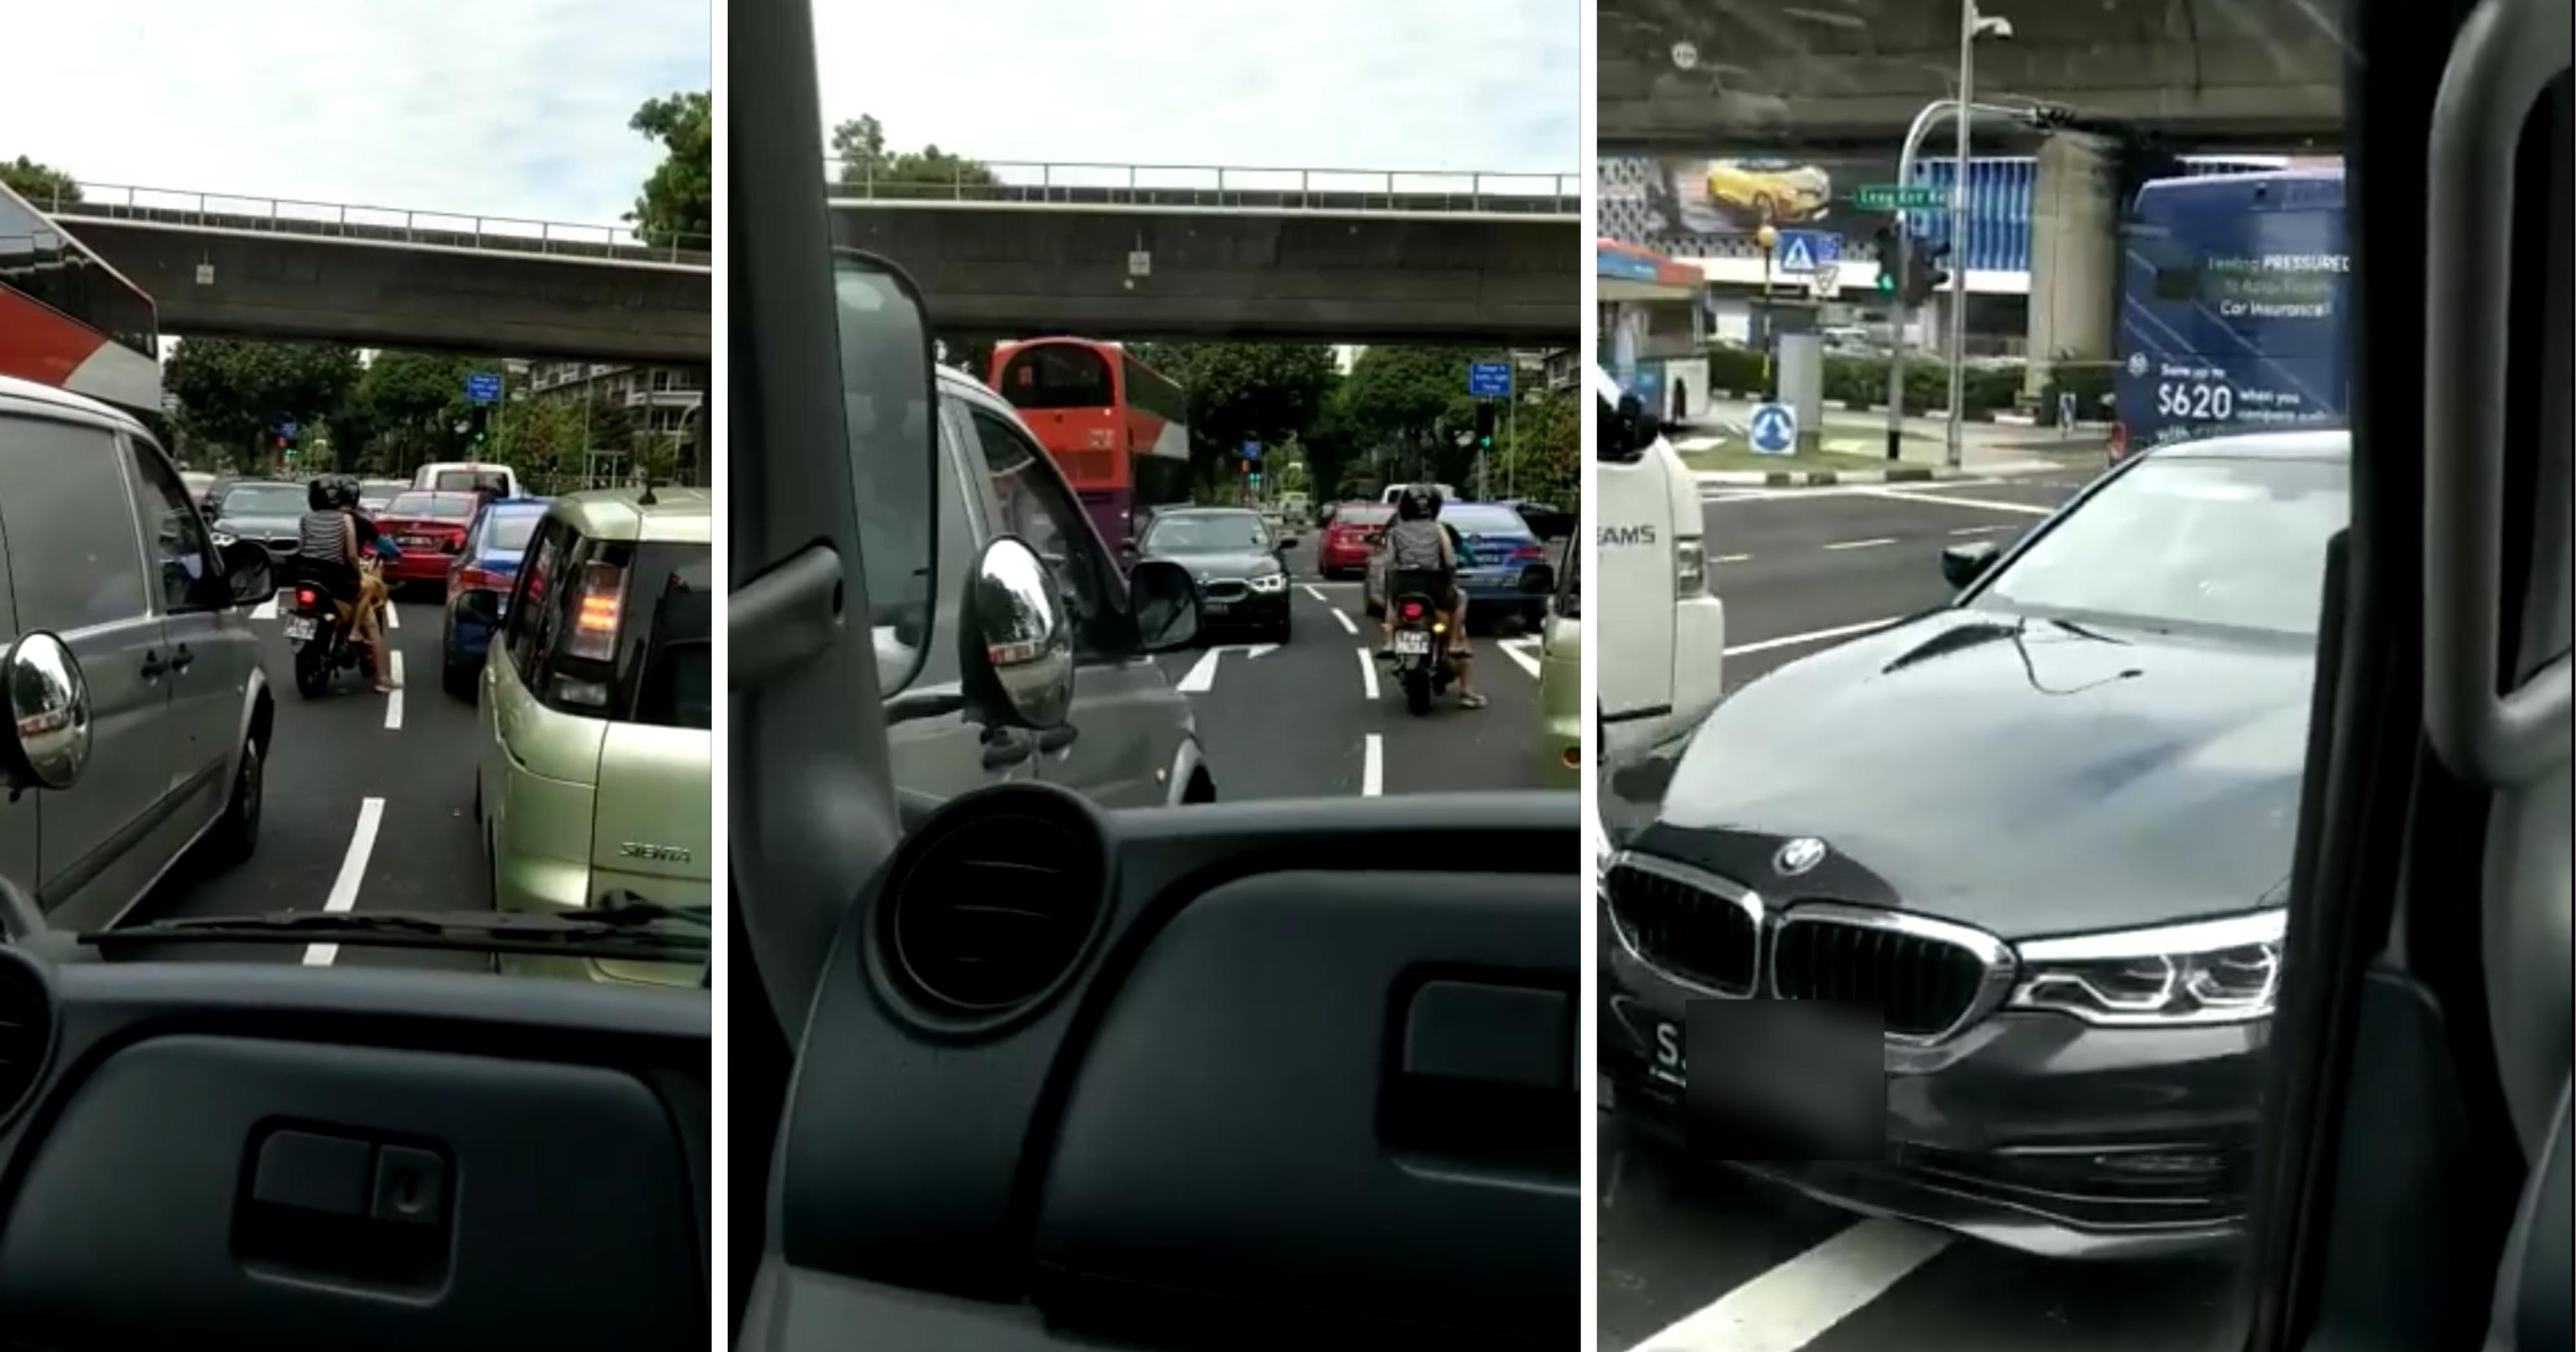 BMW driver drives against traffic, got cursed by others but still calmly driving